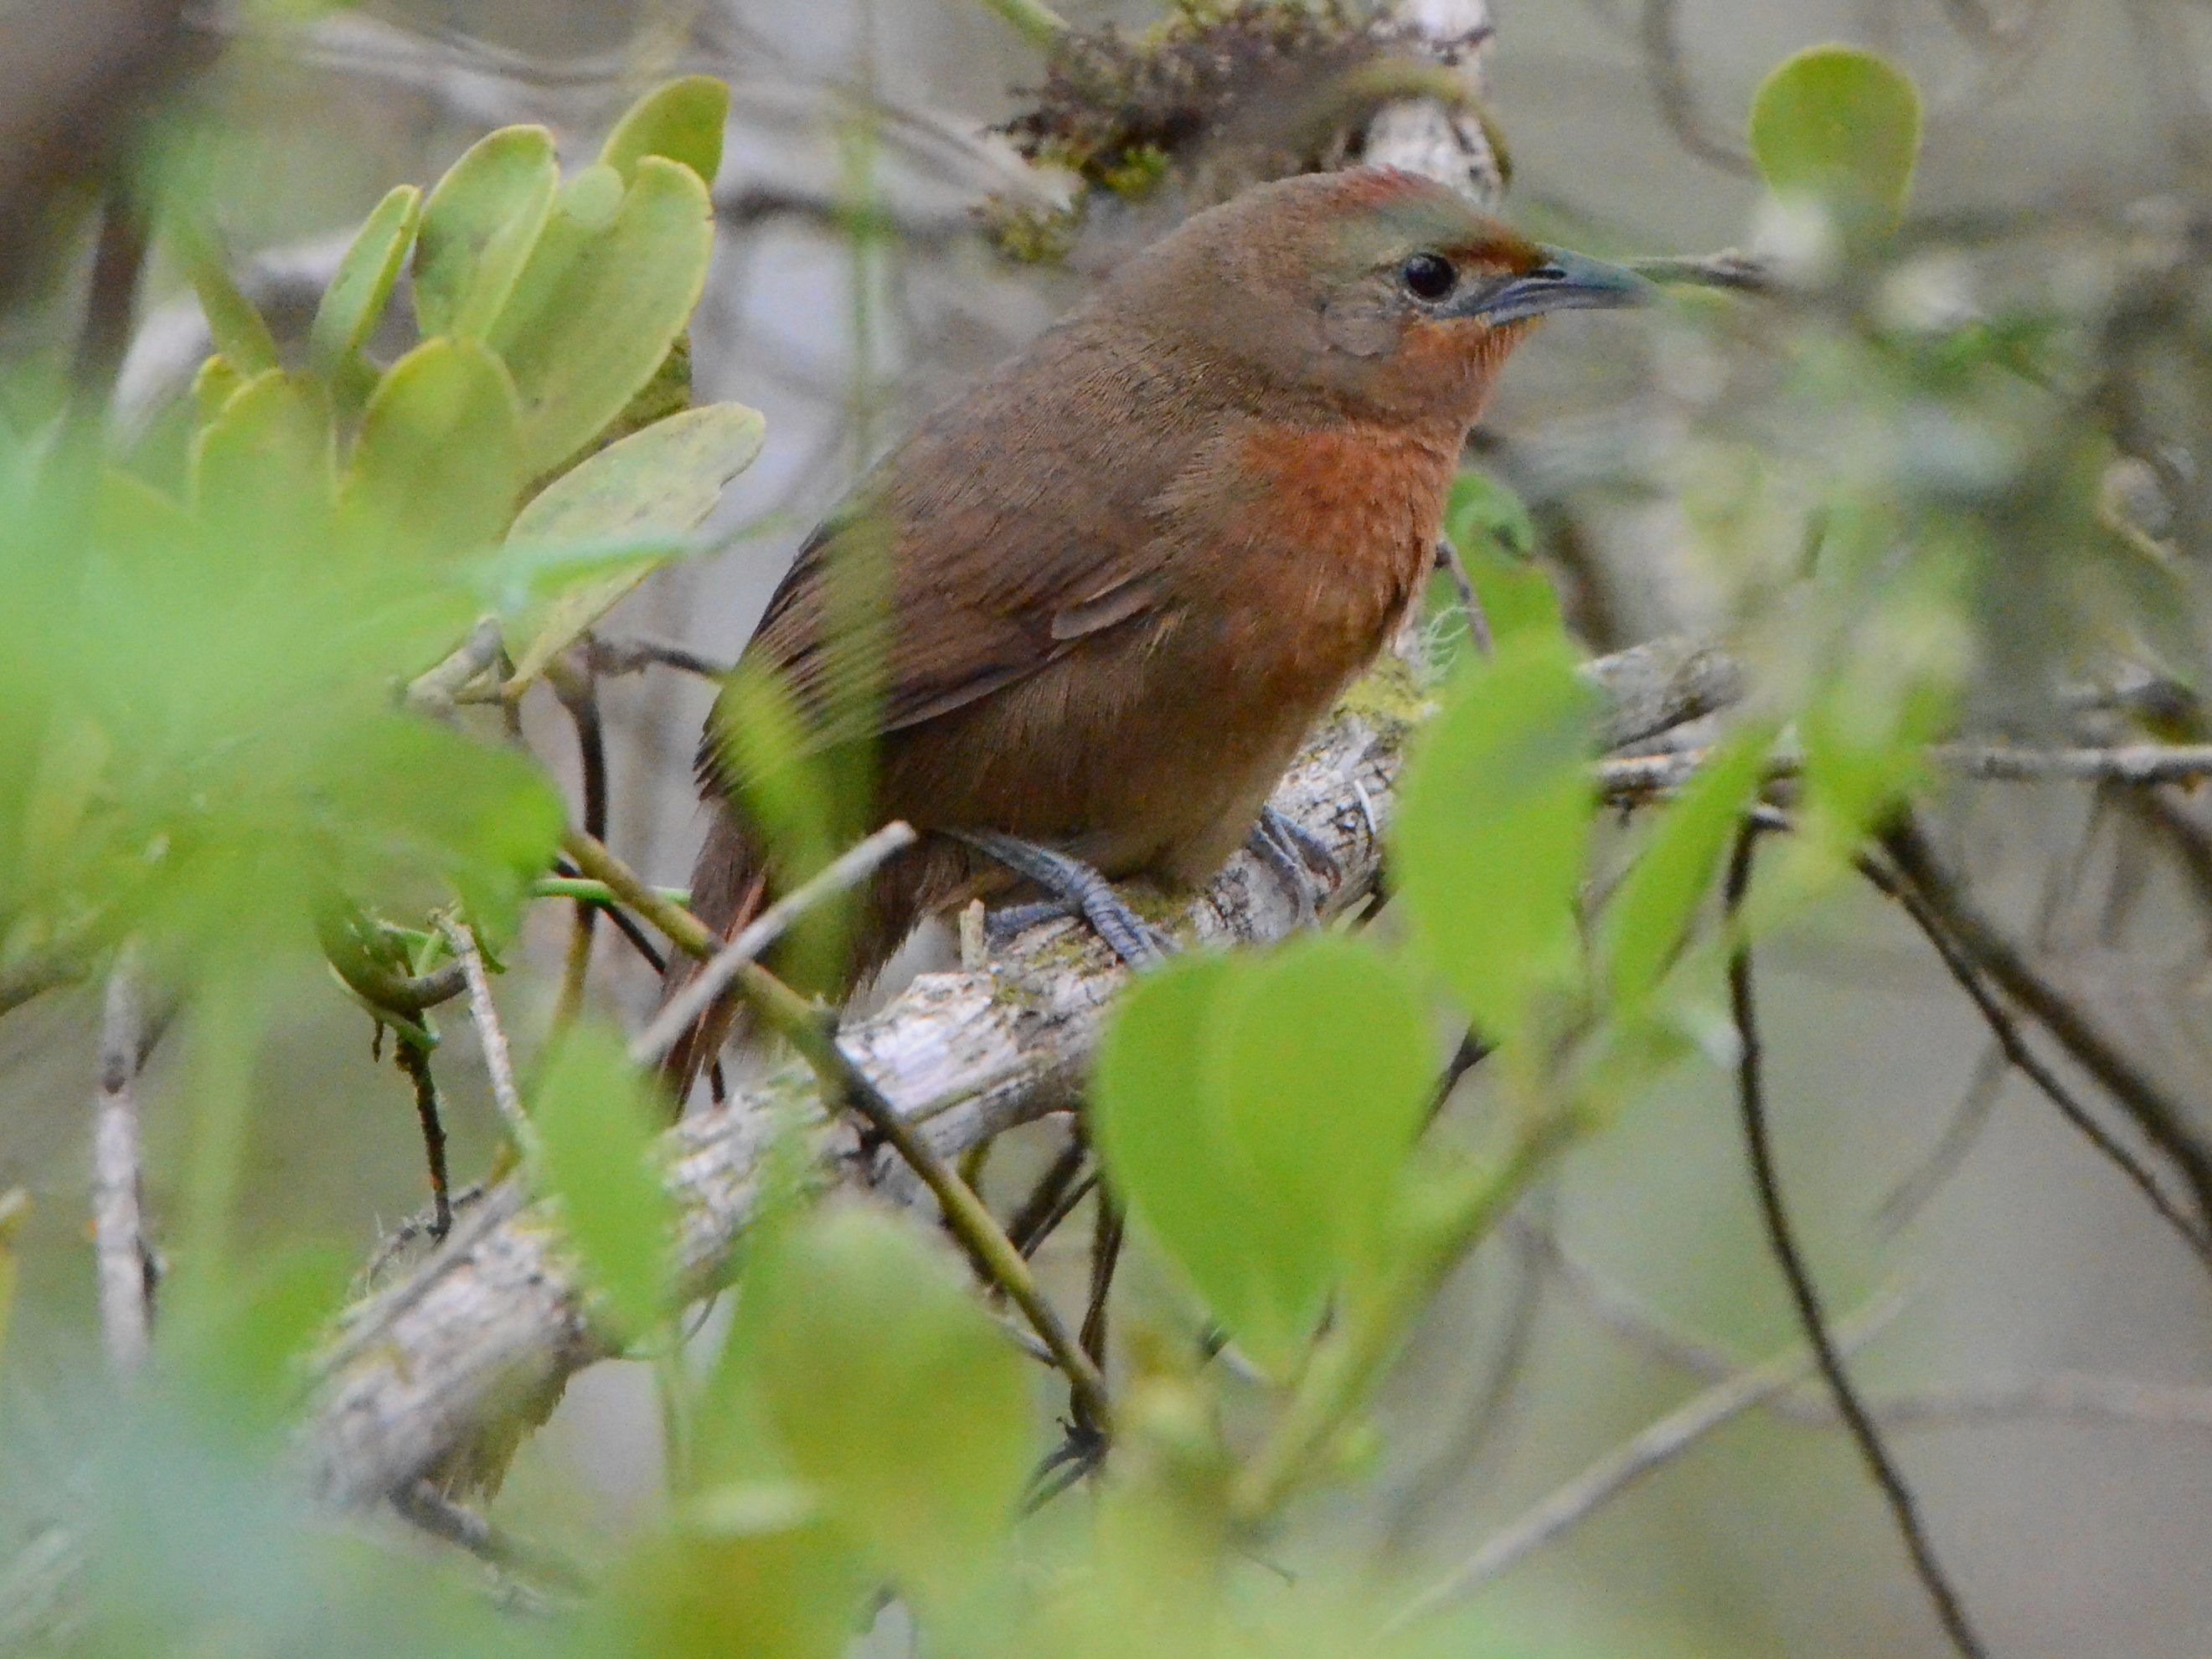 Click picture to see more Orange-breasted (Red-eyed) Thornbirds.